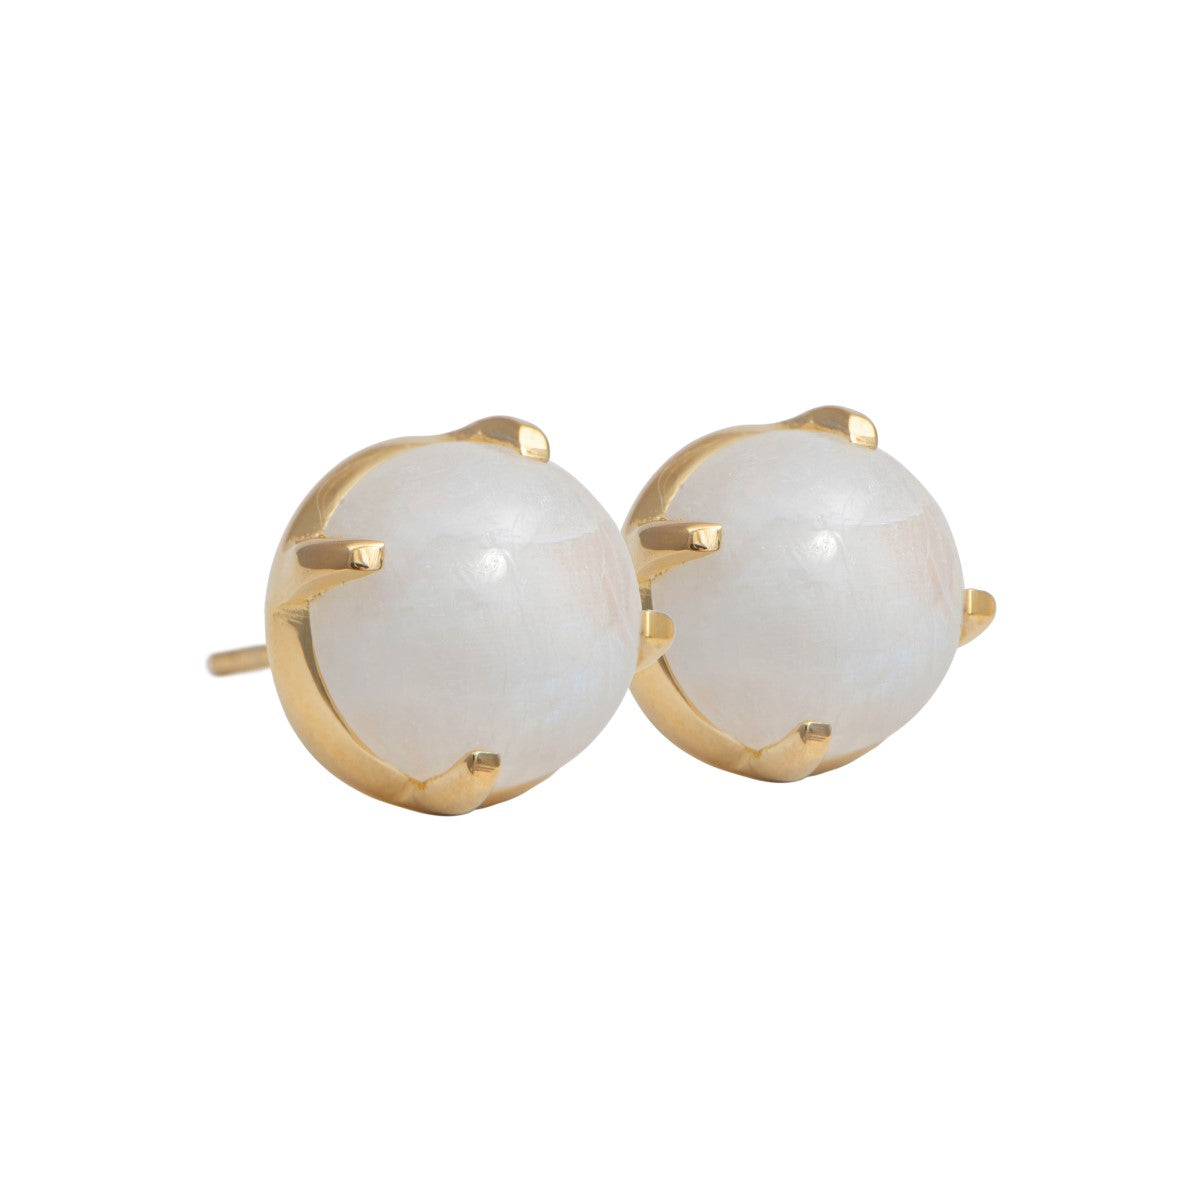 Round Cabochon Moonstone Stud Earrings in Gold Plated Sterling Silver